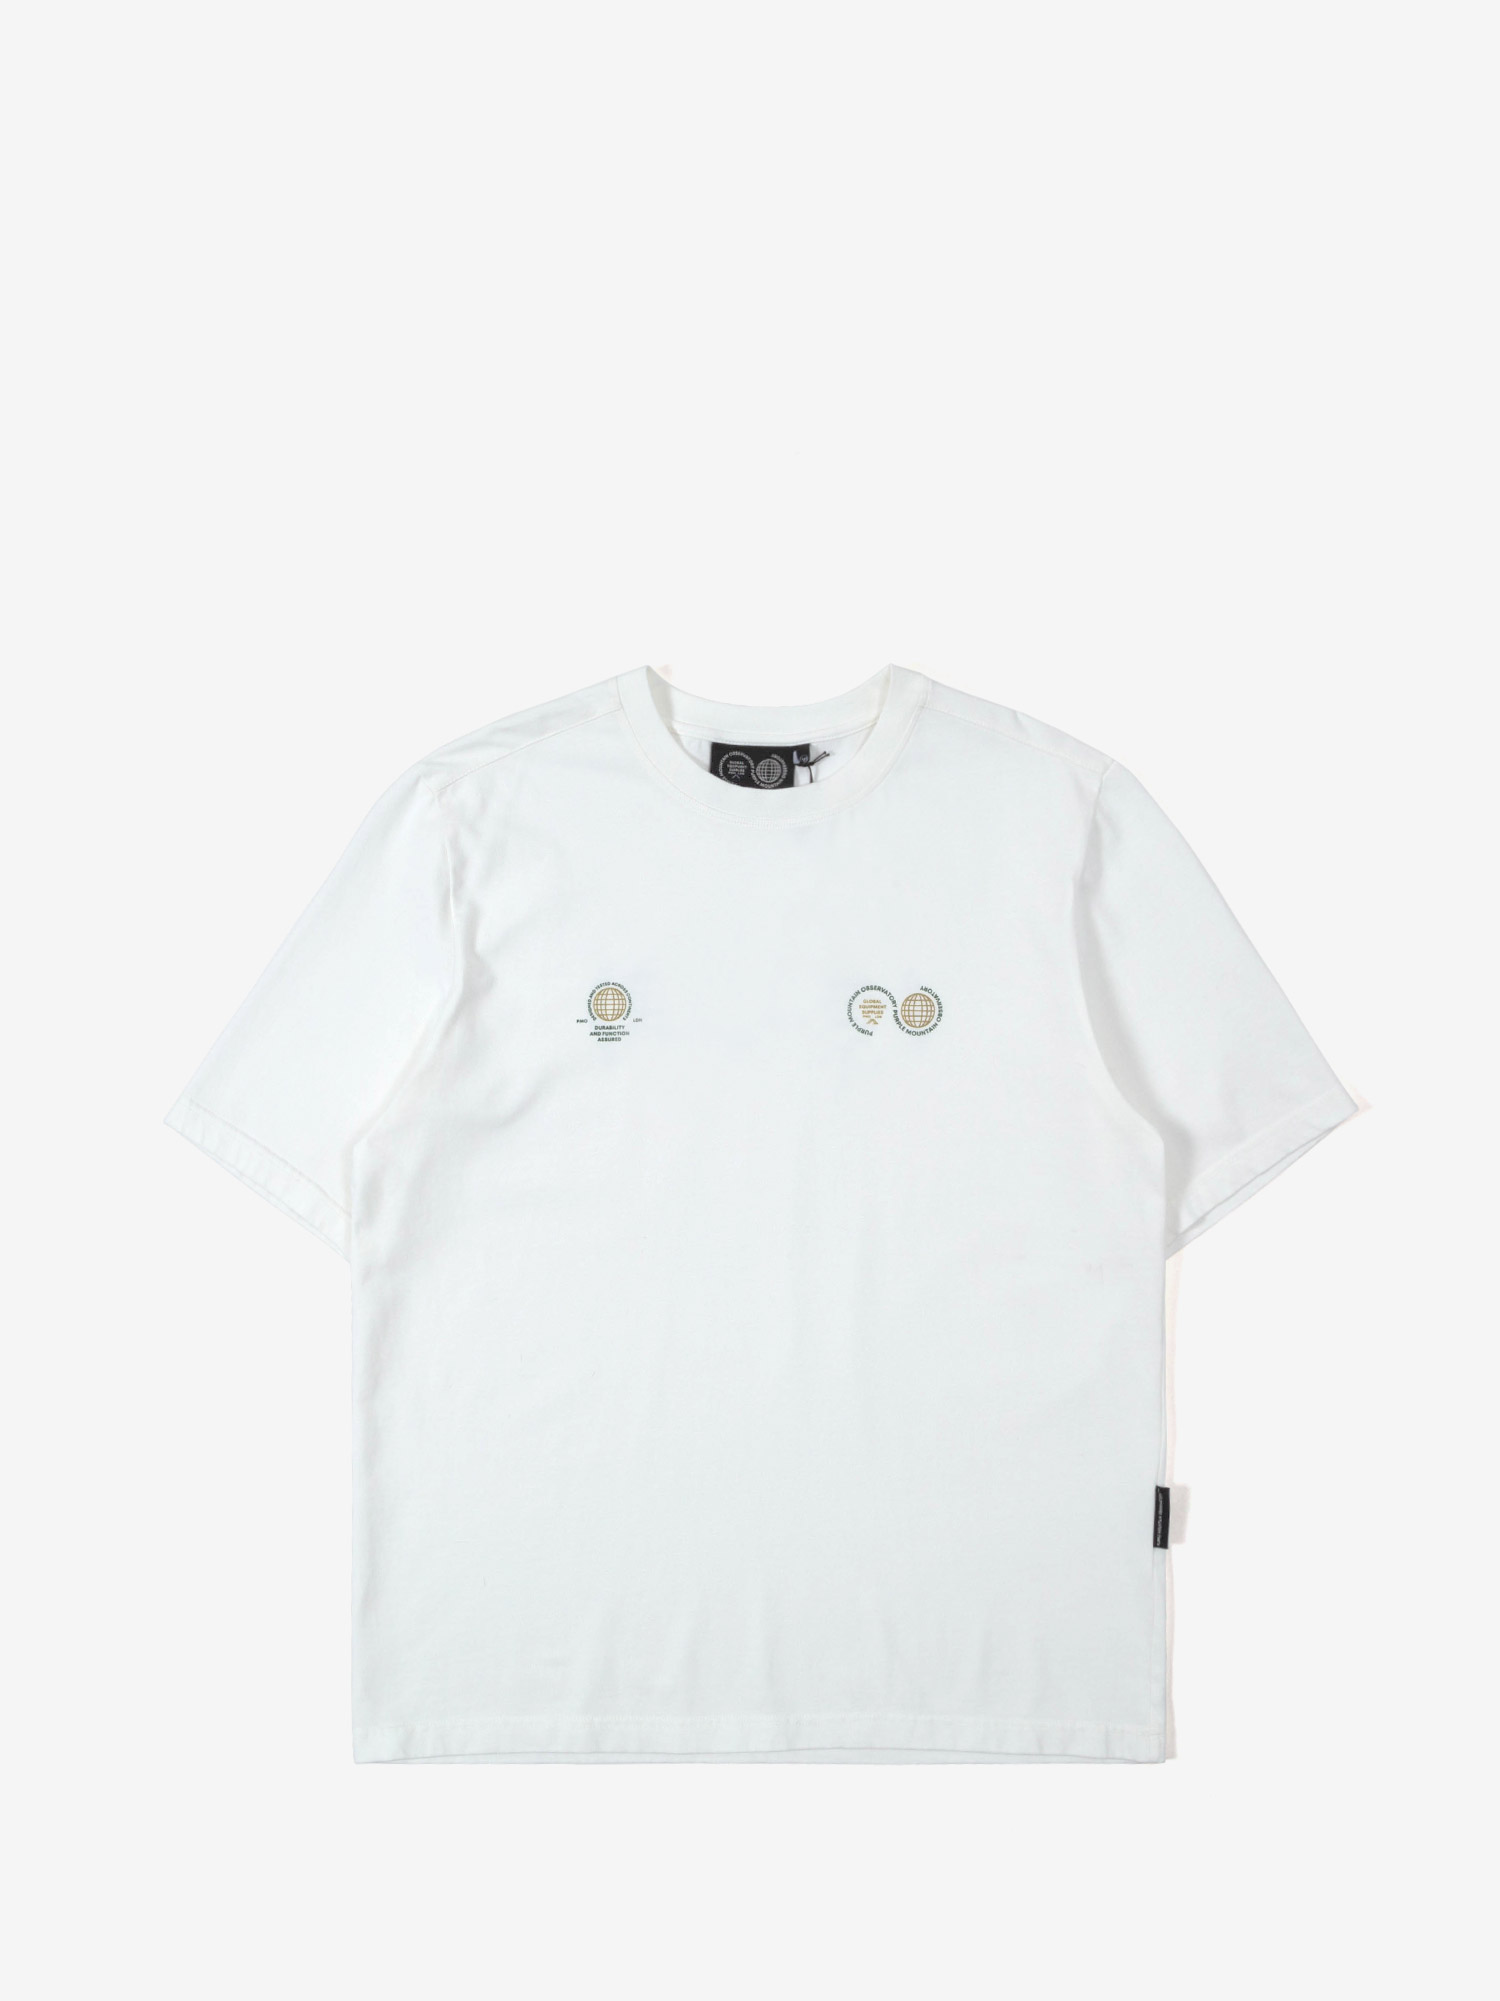 Featured image for “GLOBE SHORT SLEEVE T-SHIRT WHITE”